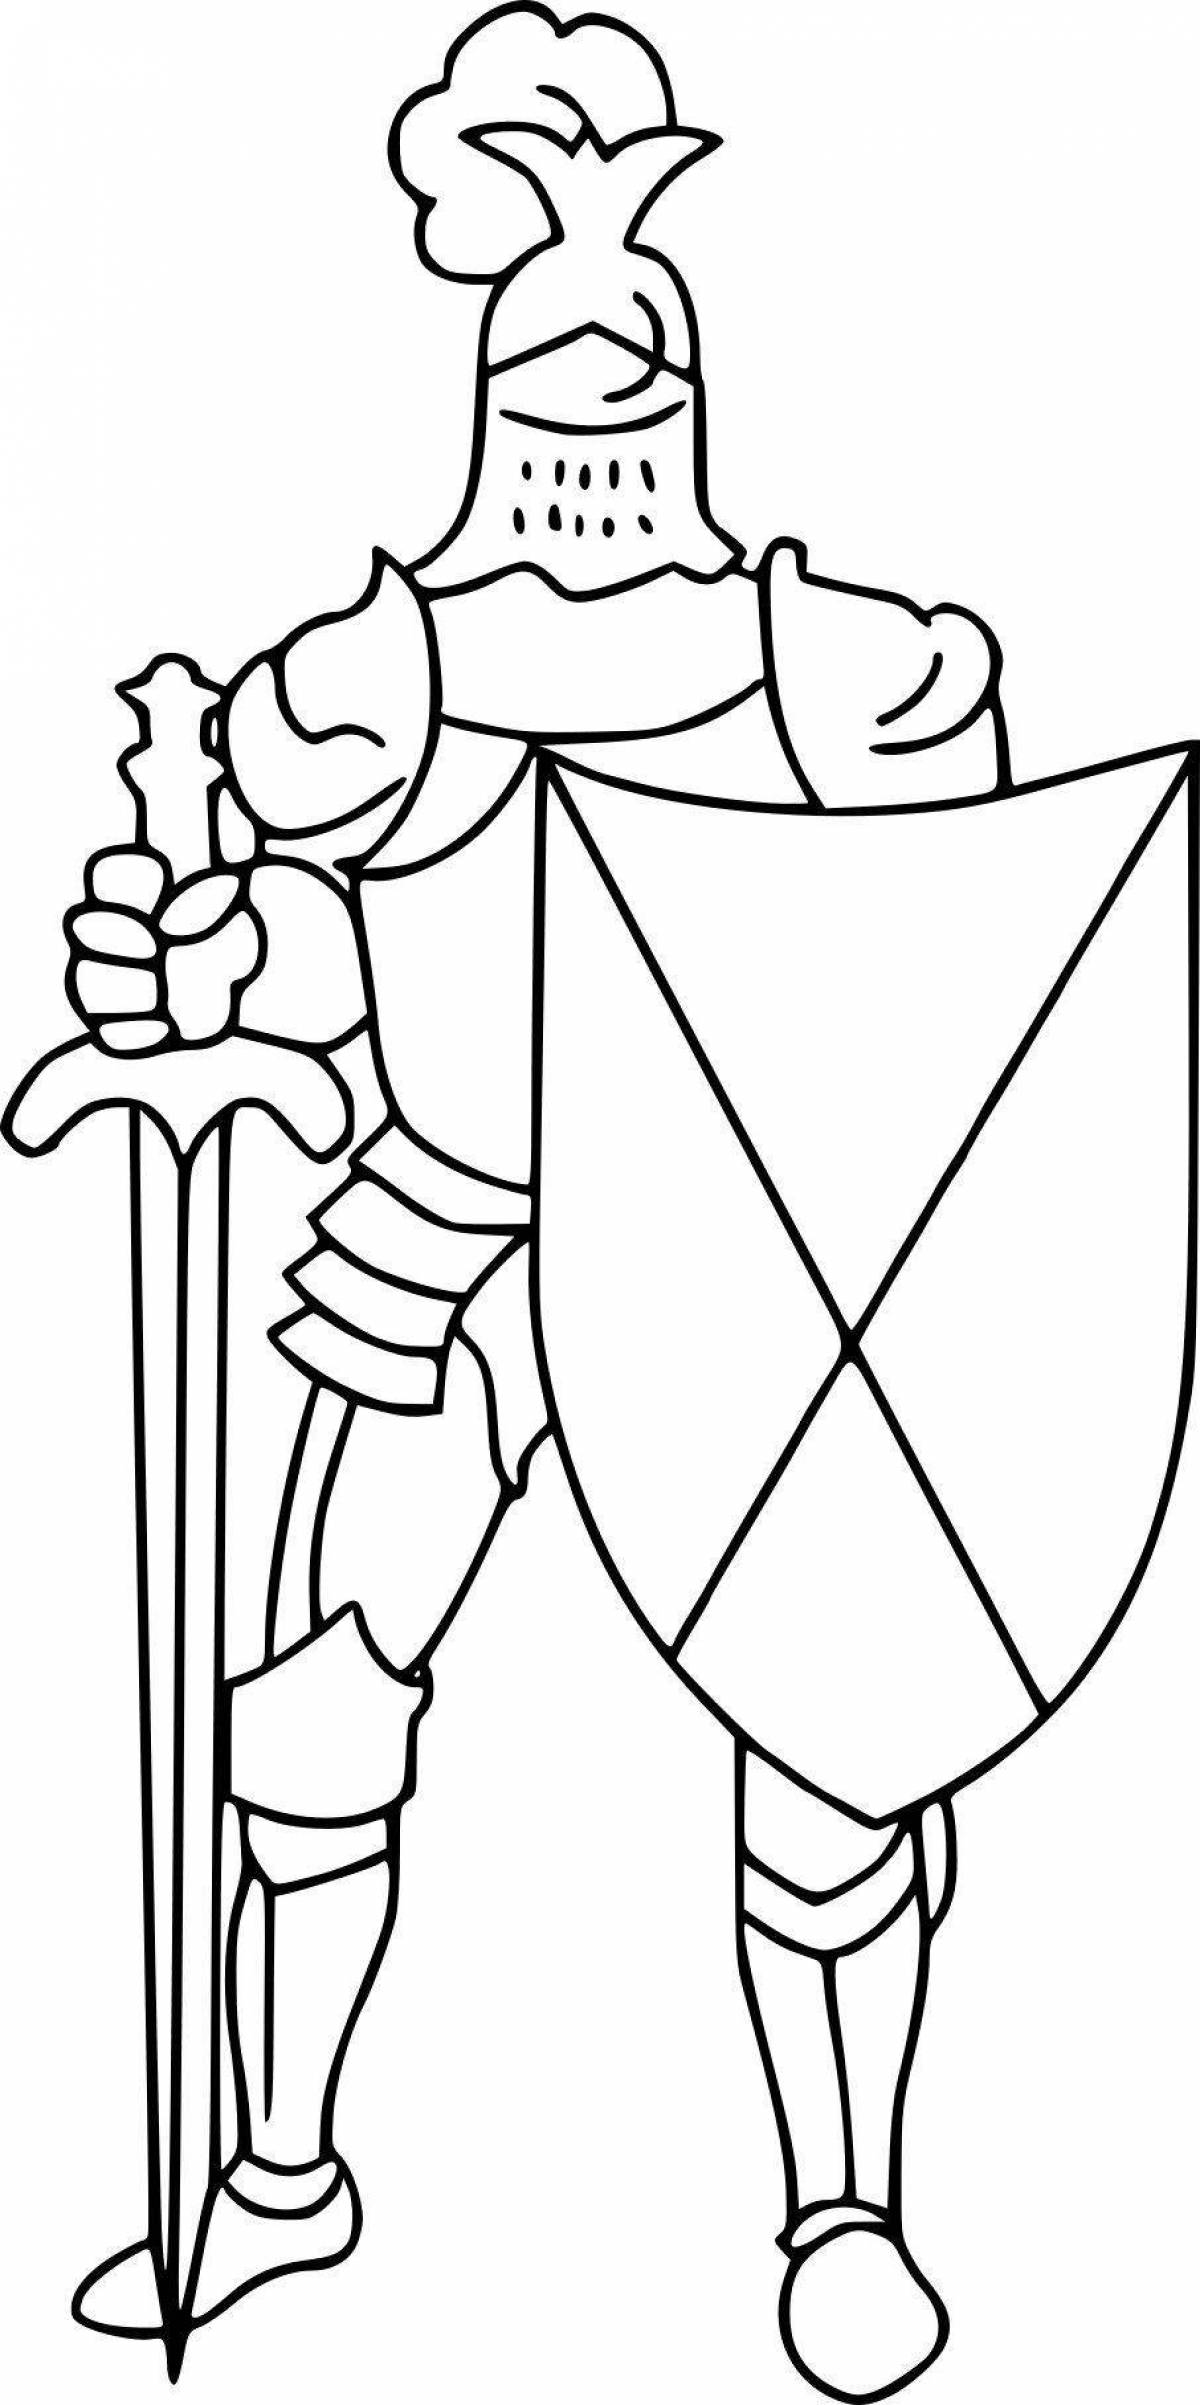 Great knight coloring book for kids